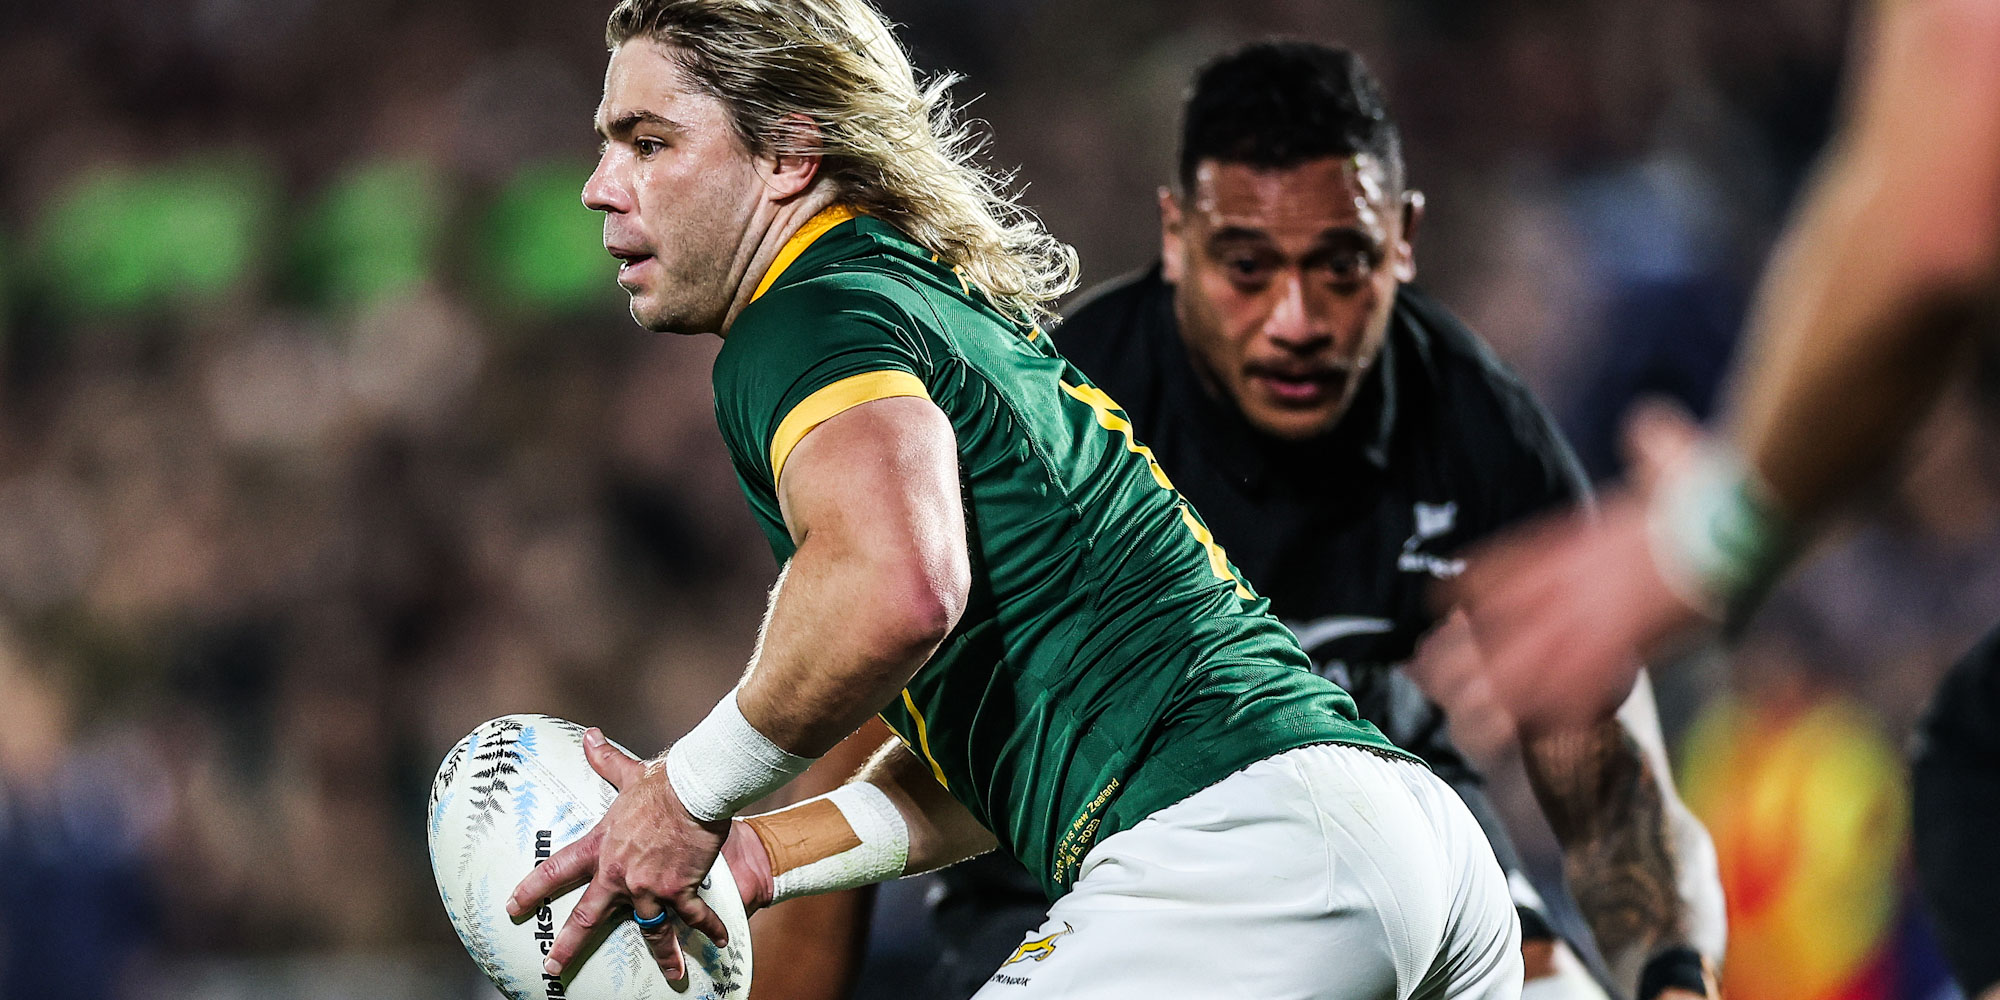 AUCKLAND, NEW ZEALAND - JULY 15: Faf de Klerk of South Africa during The Rugby Championship match between the New Zealand All Blacks and South Africa Springboks at Mt Smart Stadium on July 15, 2023 in Auckland, New Zealand. (Photo by Phil Walter/Getty Images)